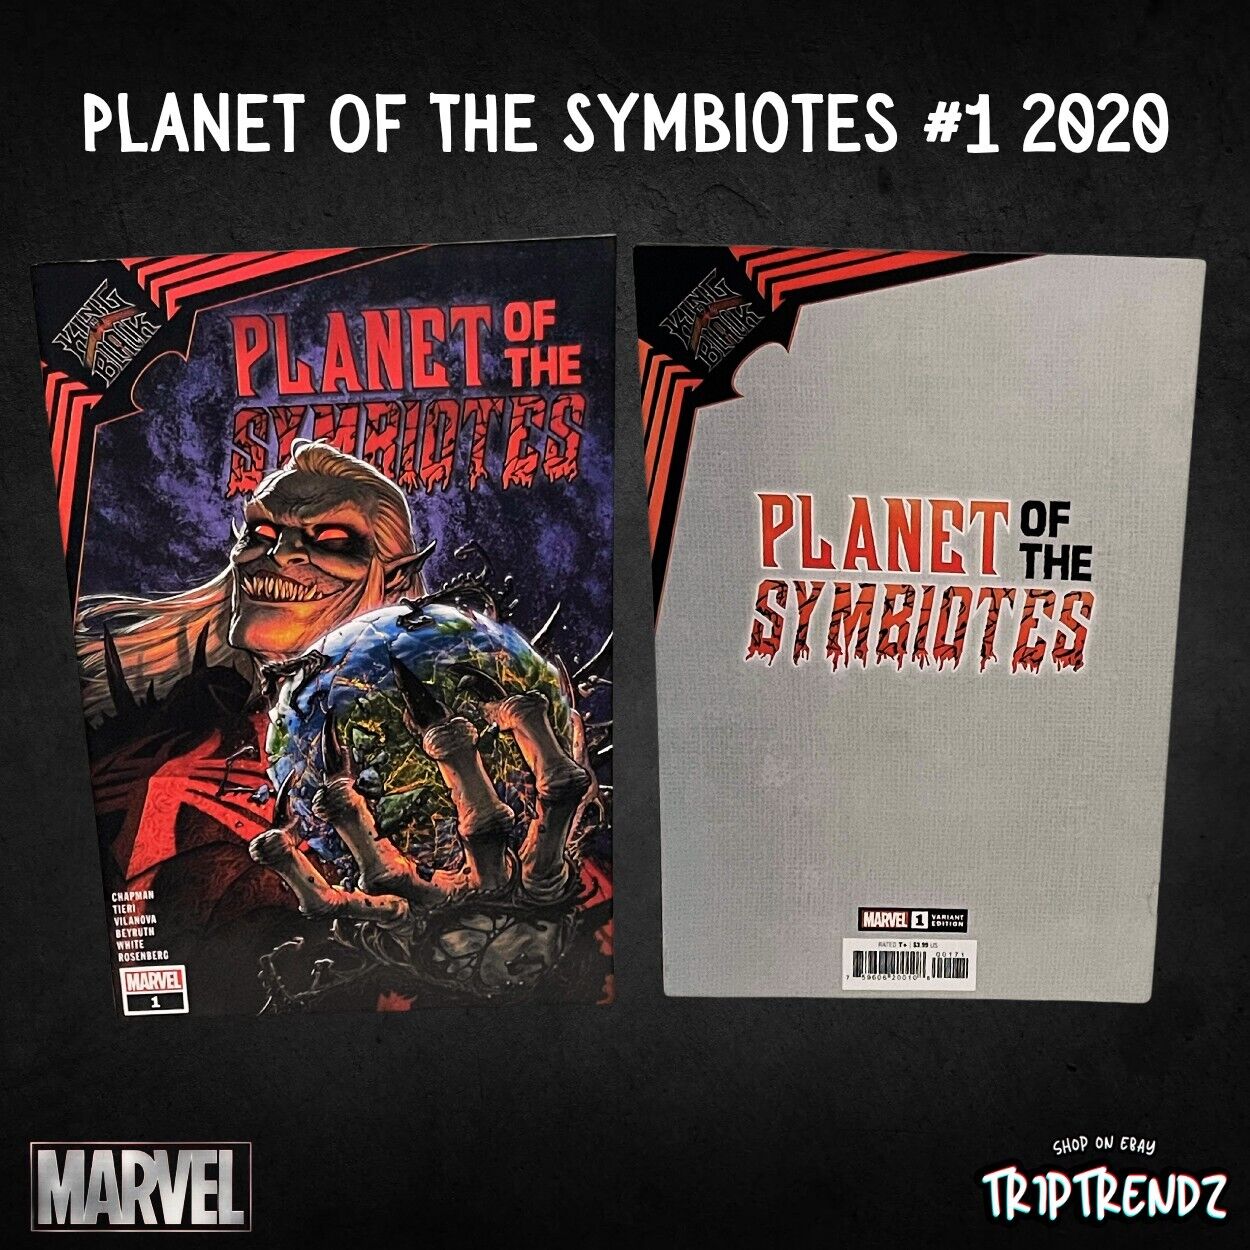 Planet Of The Symbiotes Issue #1 (2020) Marvel Comics